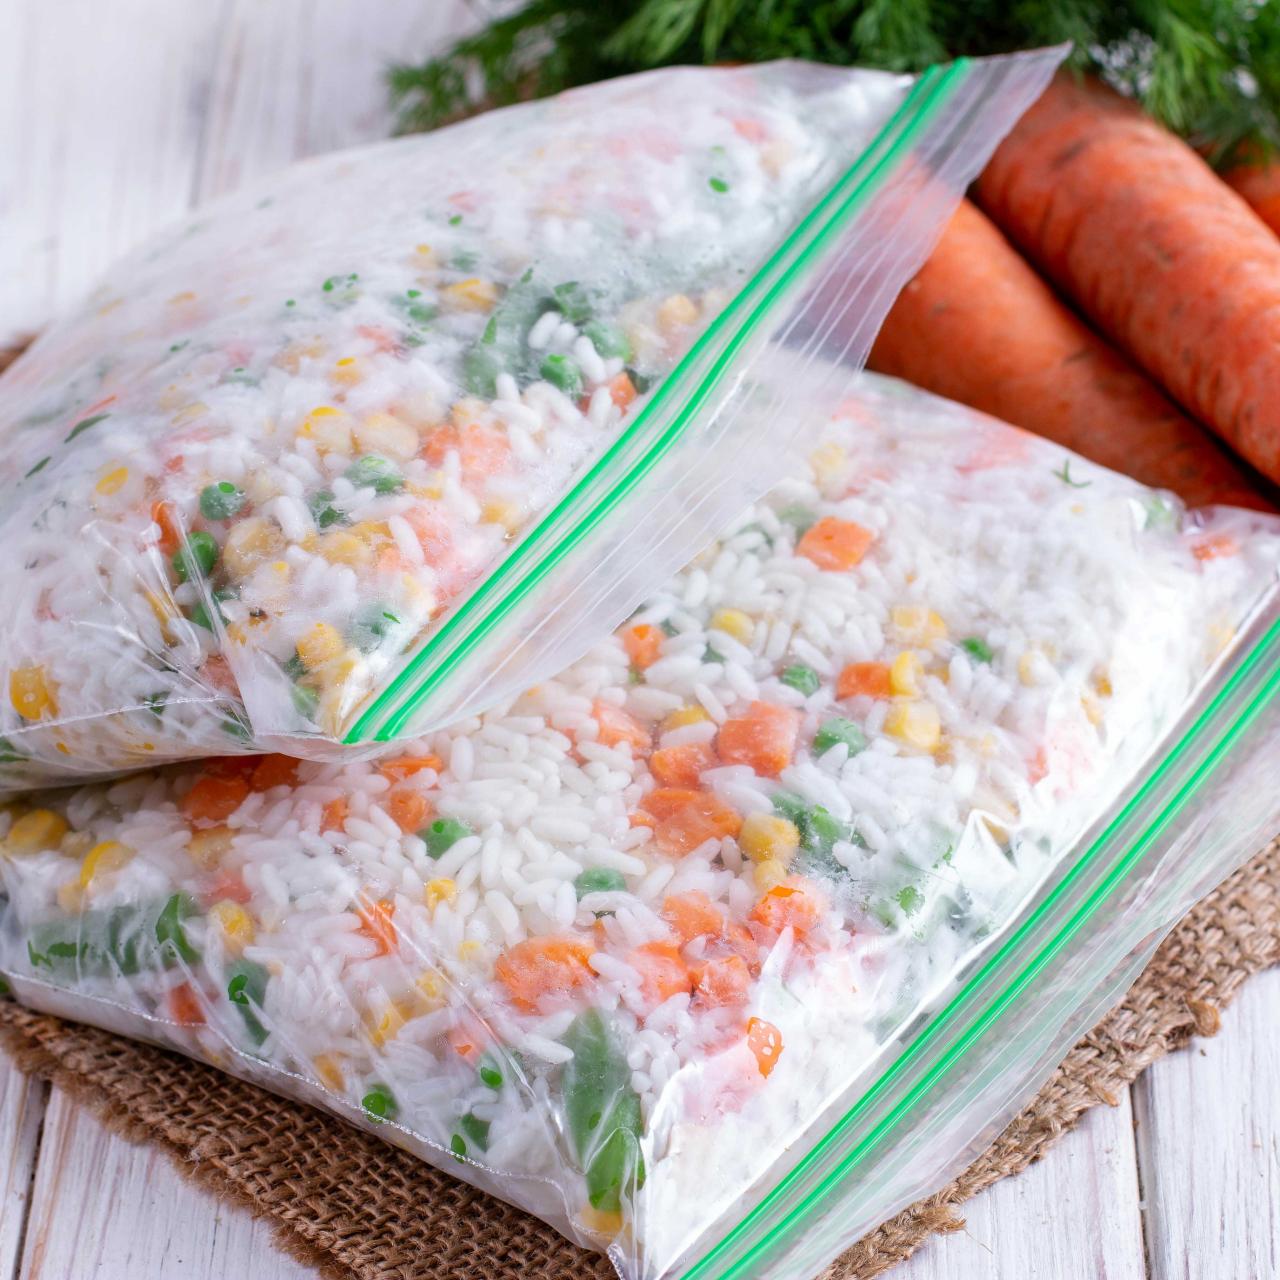 Home Cooked Dishes that Freeze Well - Handi-foil